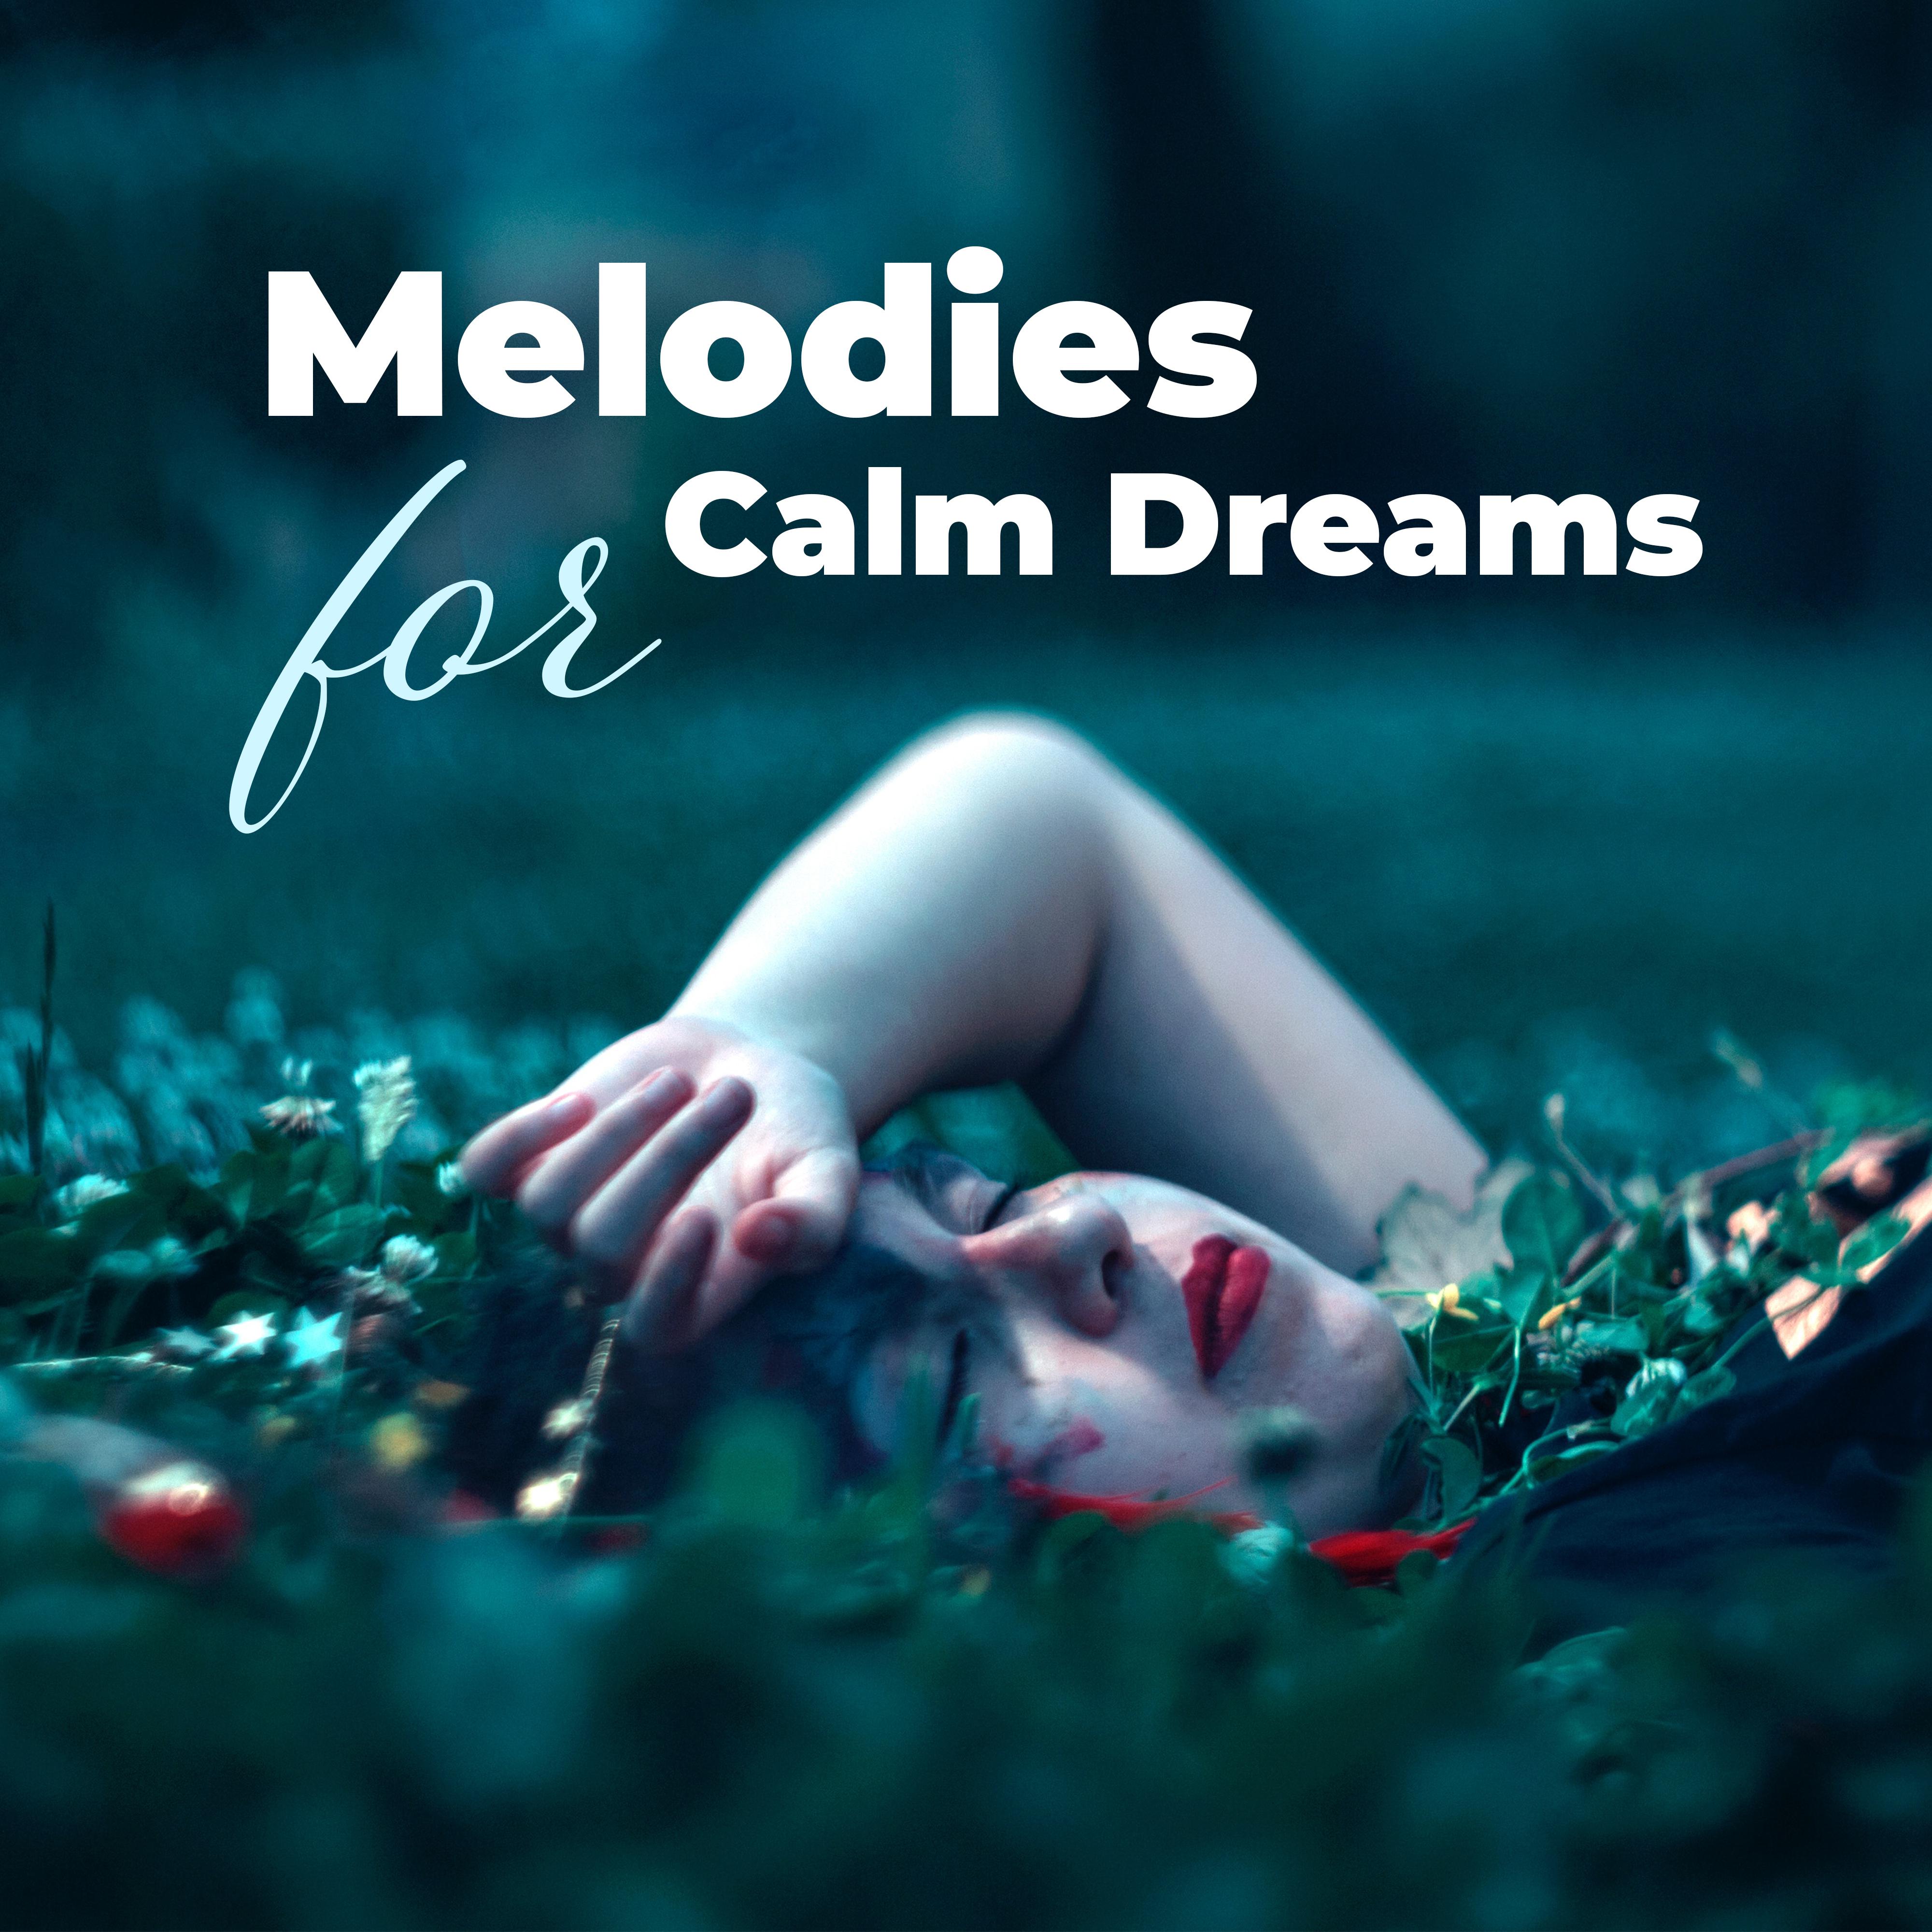 Melodies for Calm Dreams